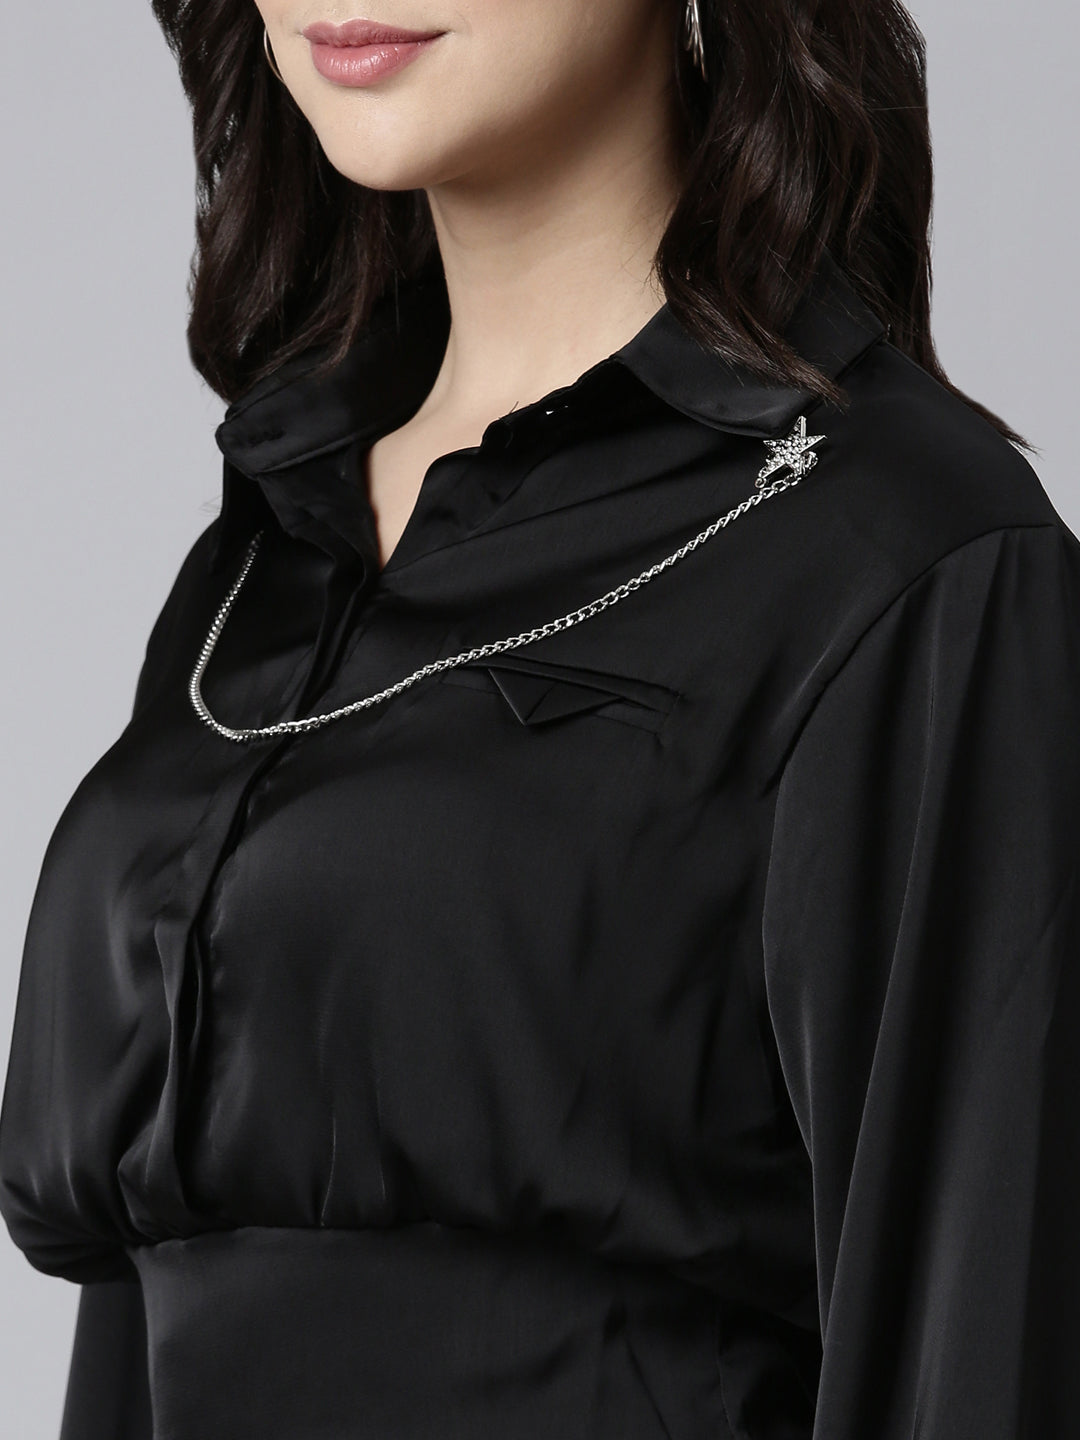 Women Solid Black Blouson Top Comes with Neck Chain